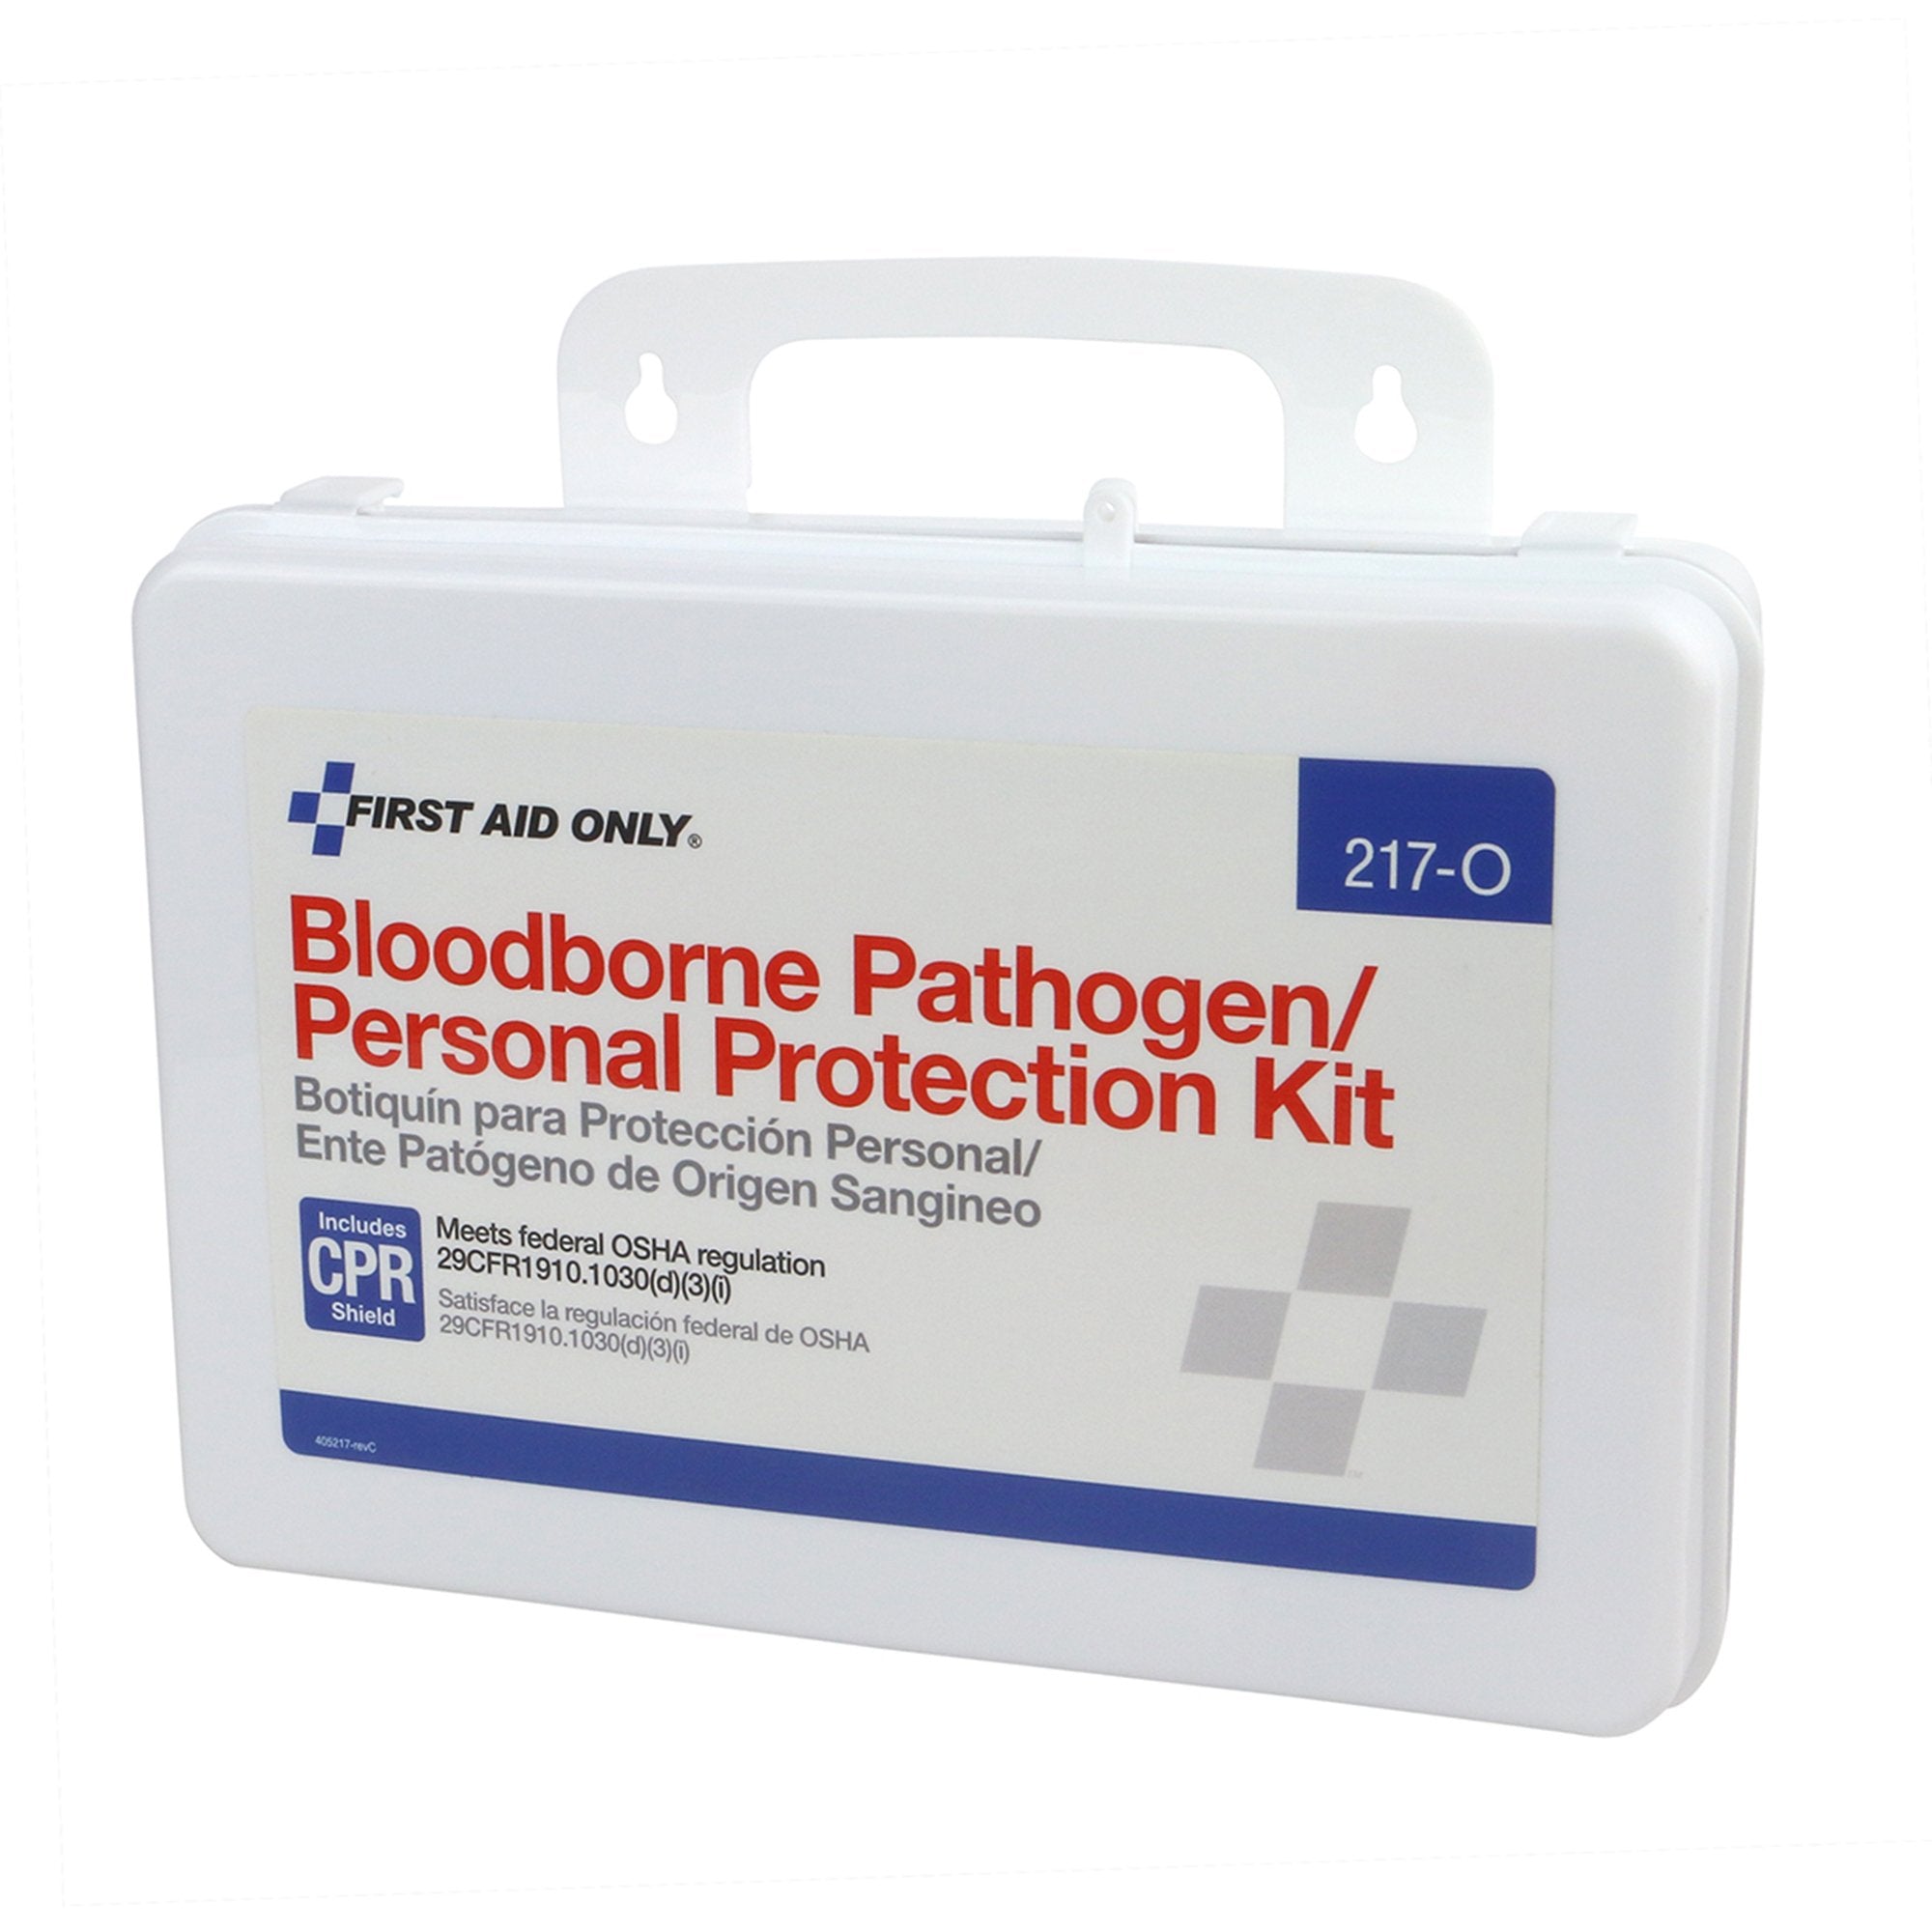 Blood Borne Pathogen / Personal Protection /Spill Kit First Aid Only